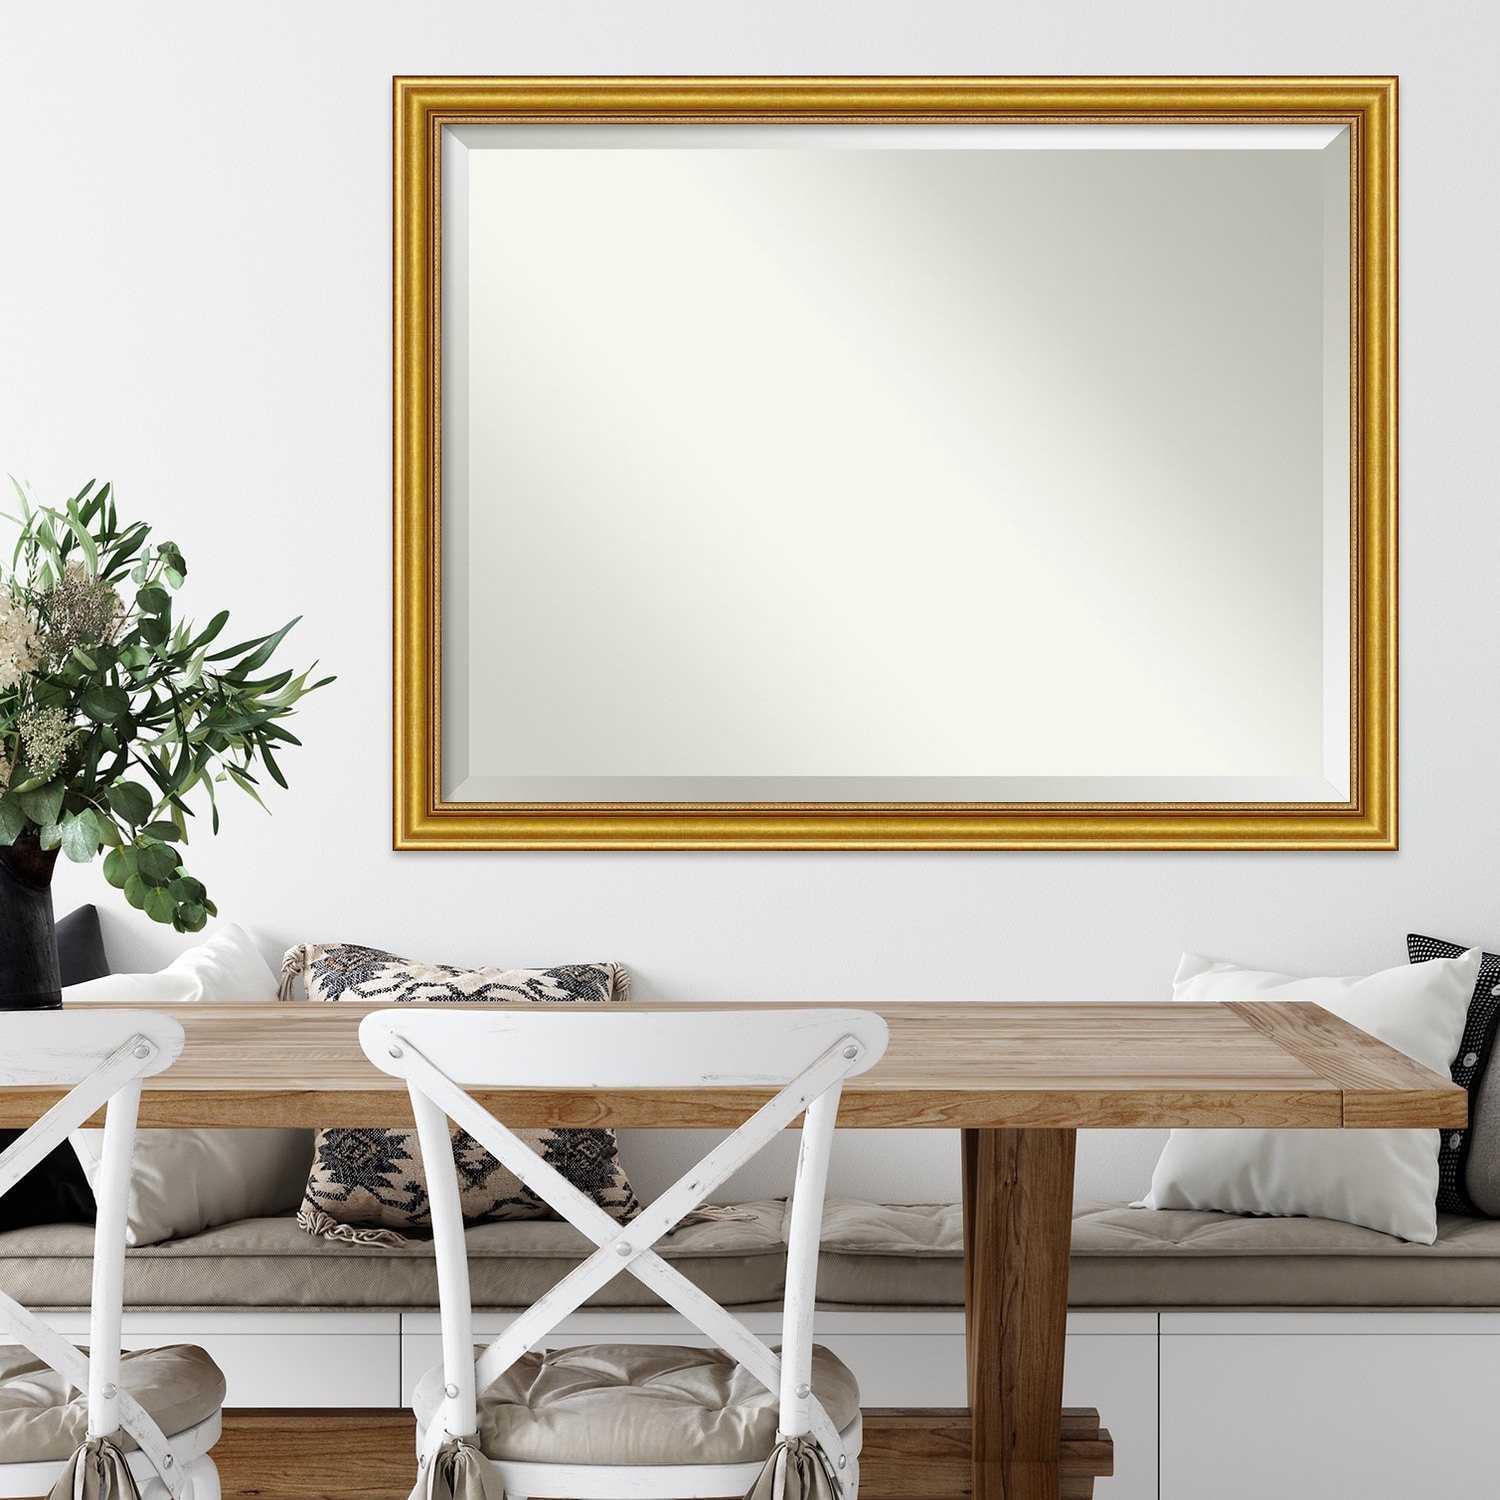 Beveled Wood Wall Mirror - Townhouse Gold Frame - Outer Size: 44 x 34 in